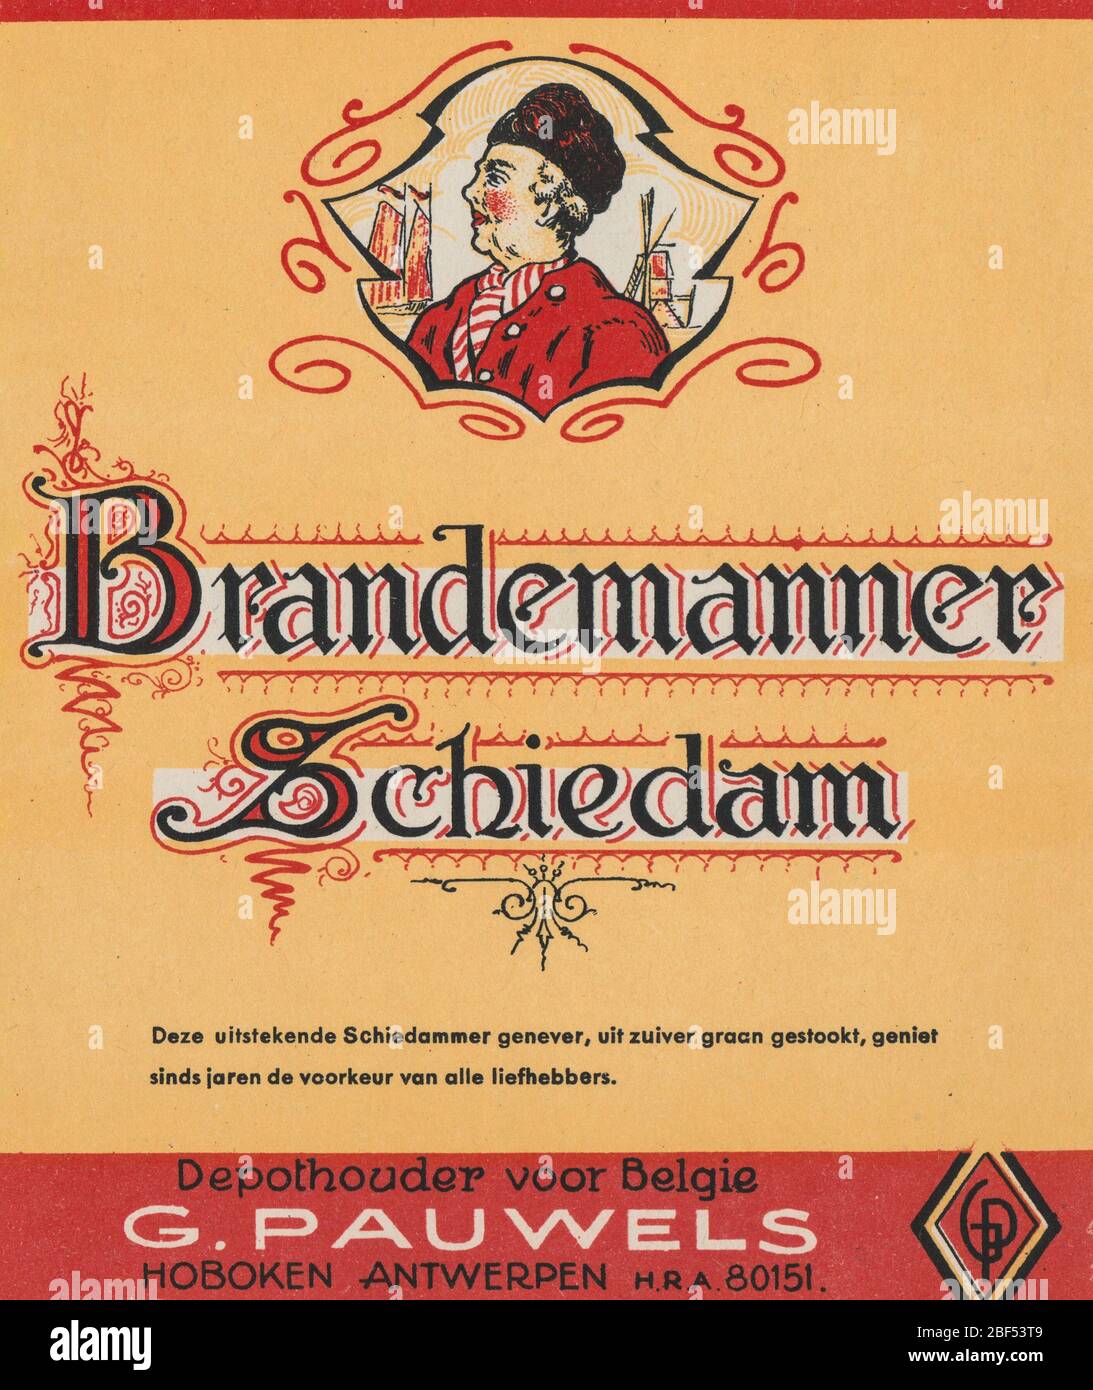 Stylish unused and new decorated vintage jenever label from gin ‘Brandemanner’, Schiedam, distilled at distillery C. Pauwels from Hoboken in Belgium Stock Photo